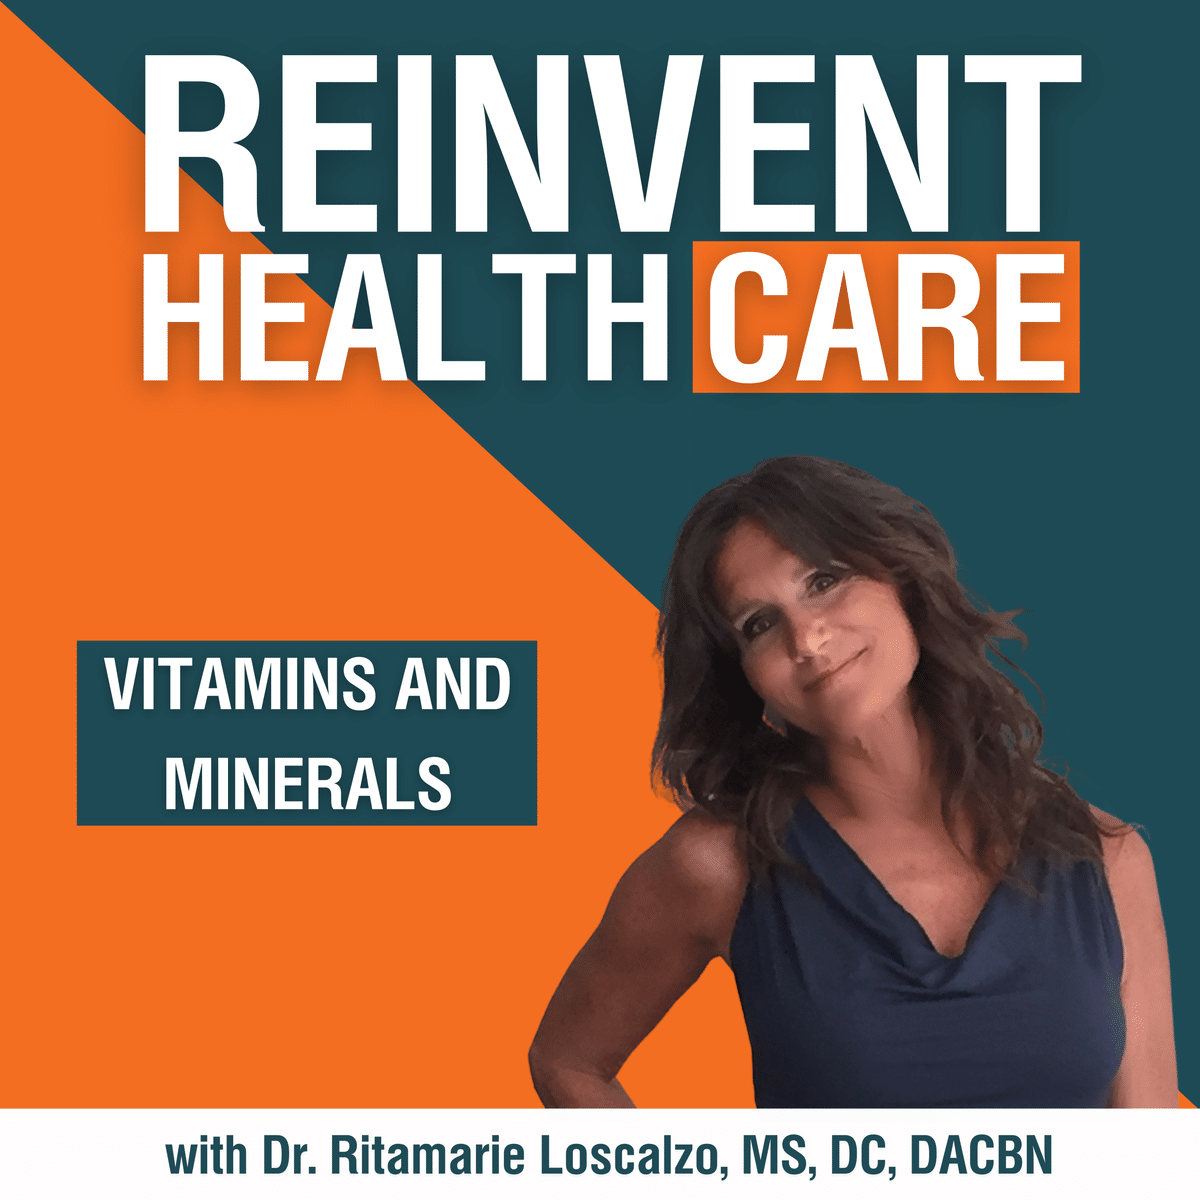 Reinvent Healthcare Vitamins and Minerals